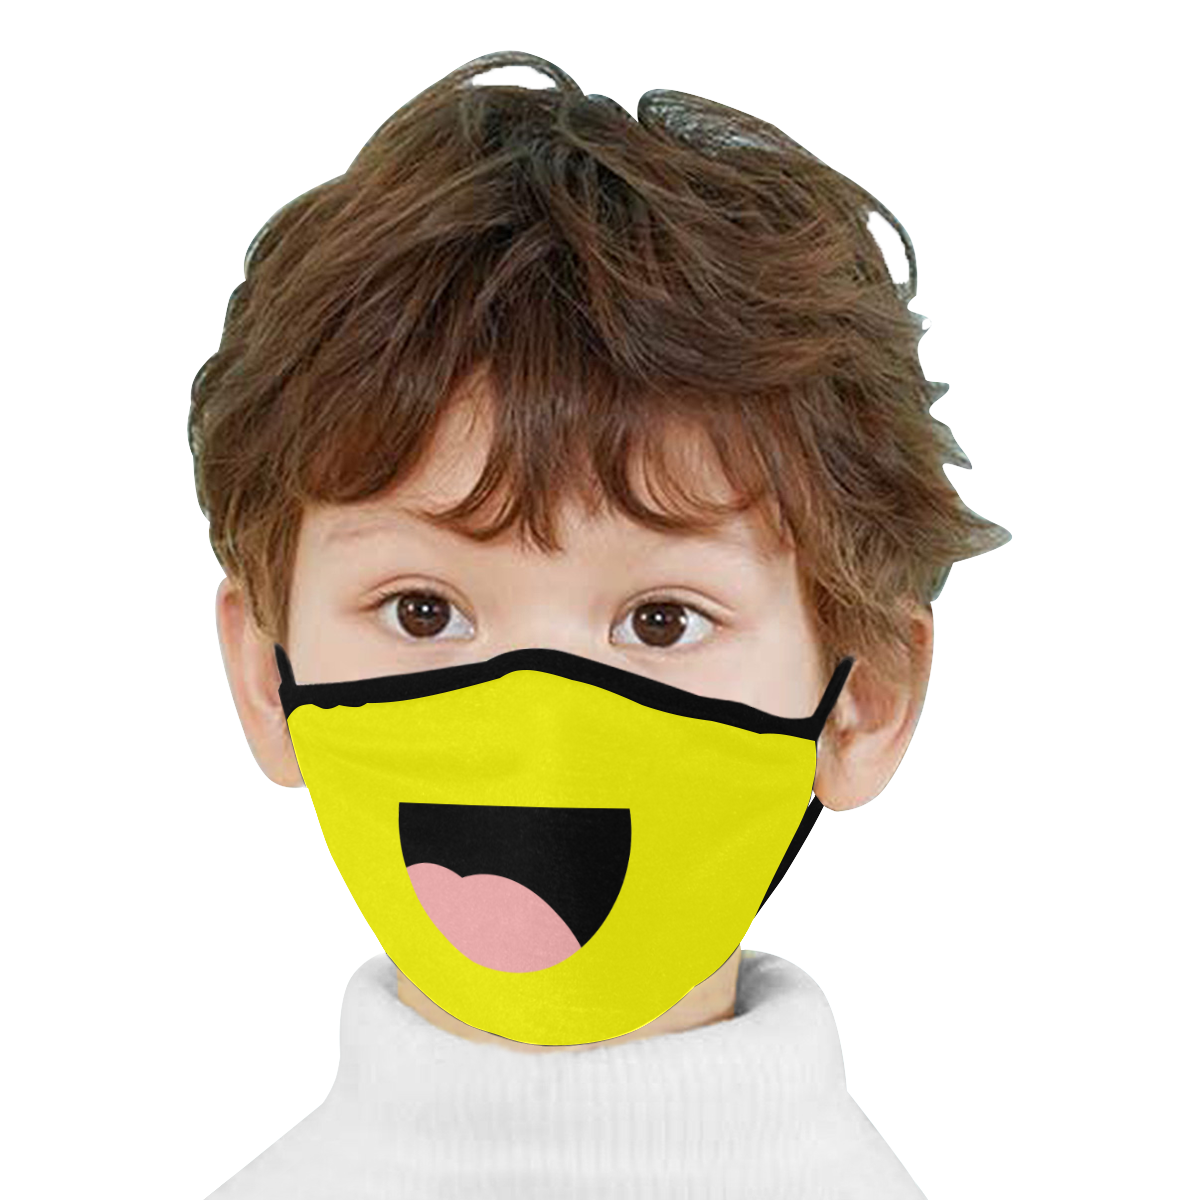 Big Smile Mouth on Yellow Mouth Mask